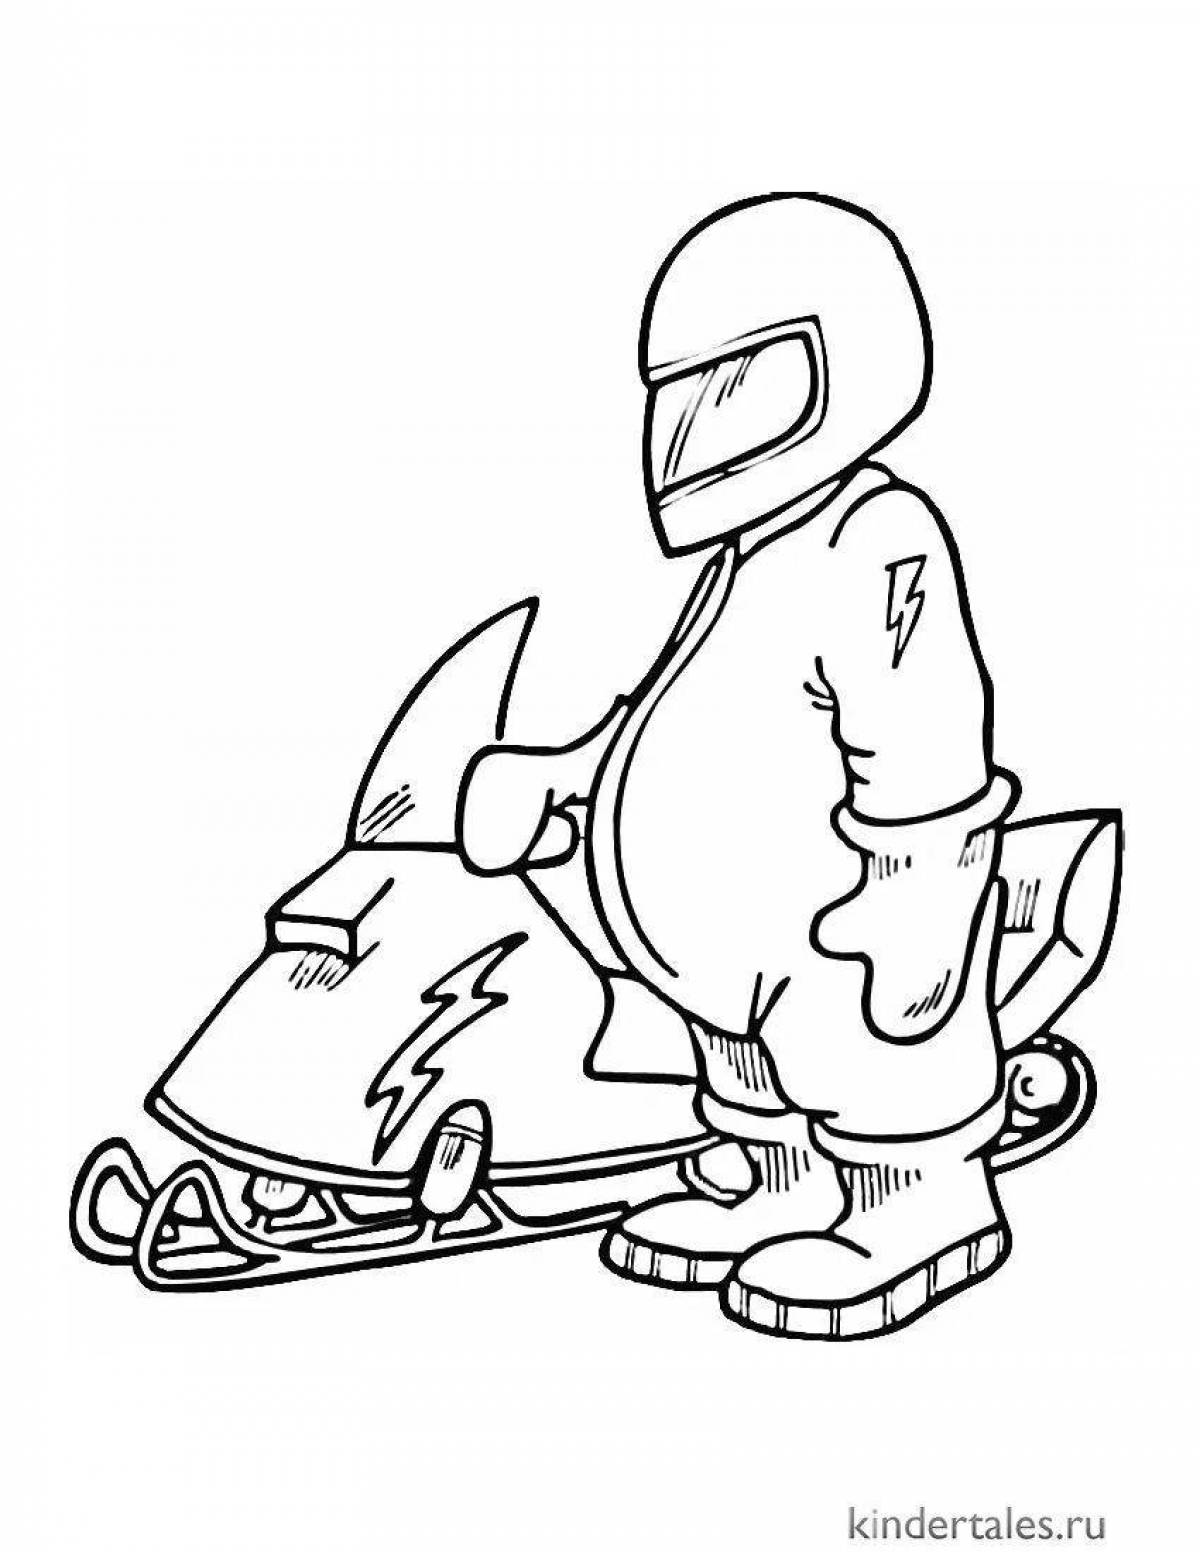 Playful snowmobile coloring page for kids